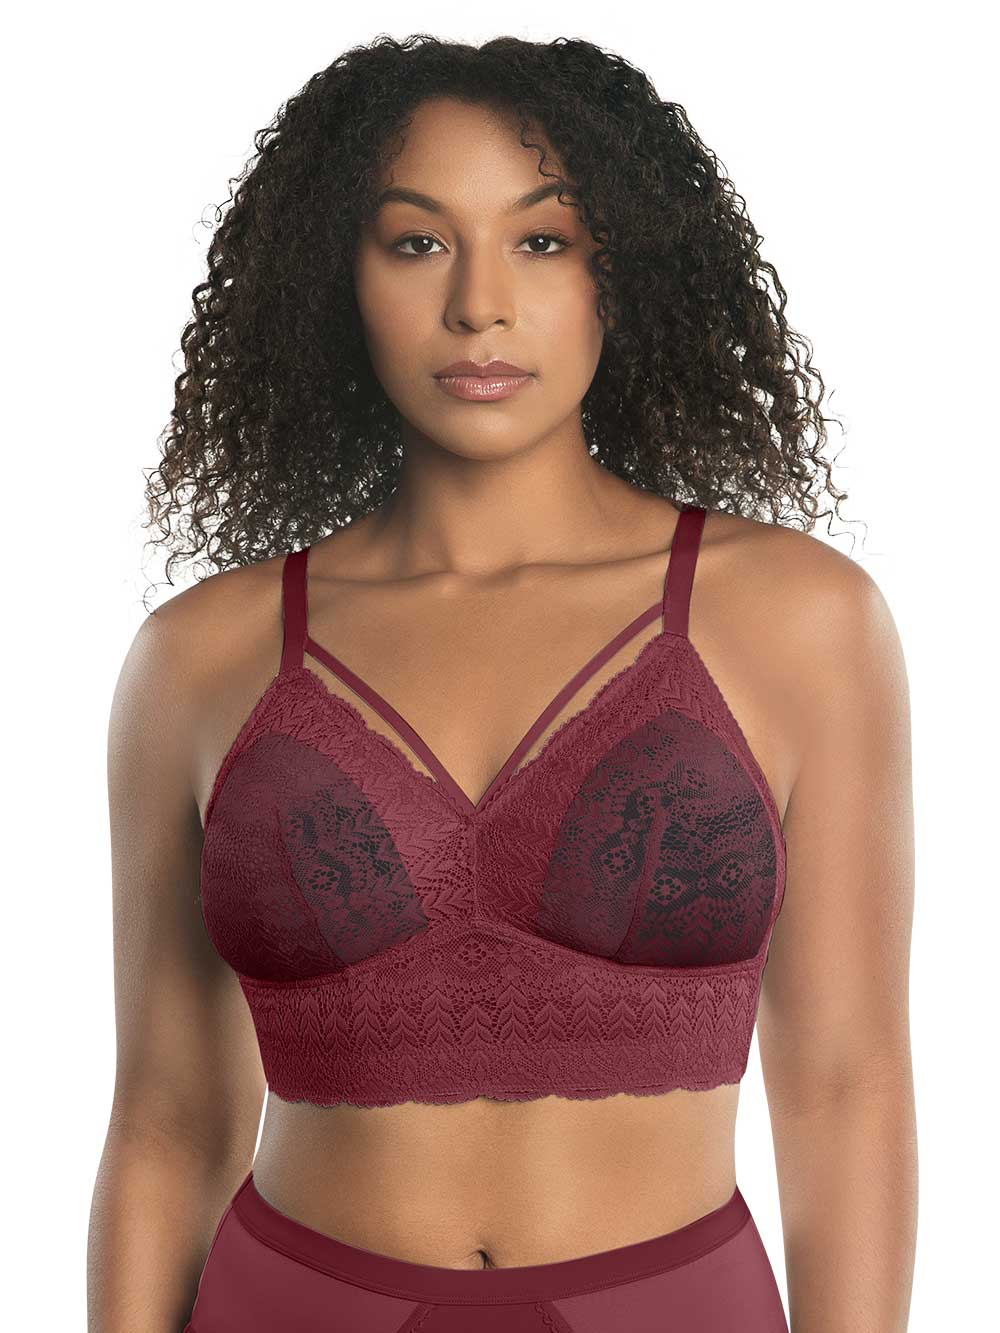 Layered Lace Wirefree Bralette, Bras